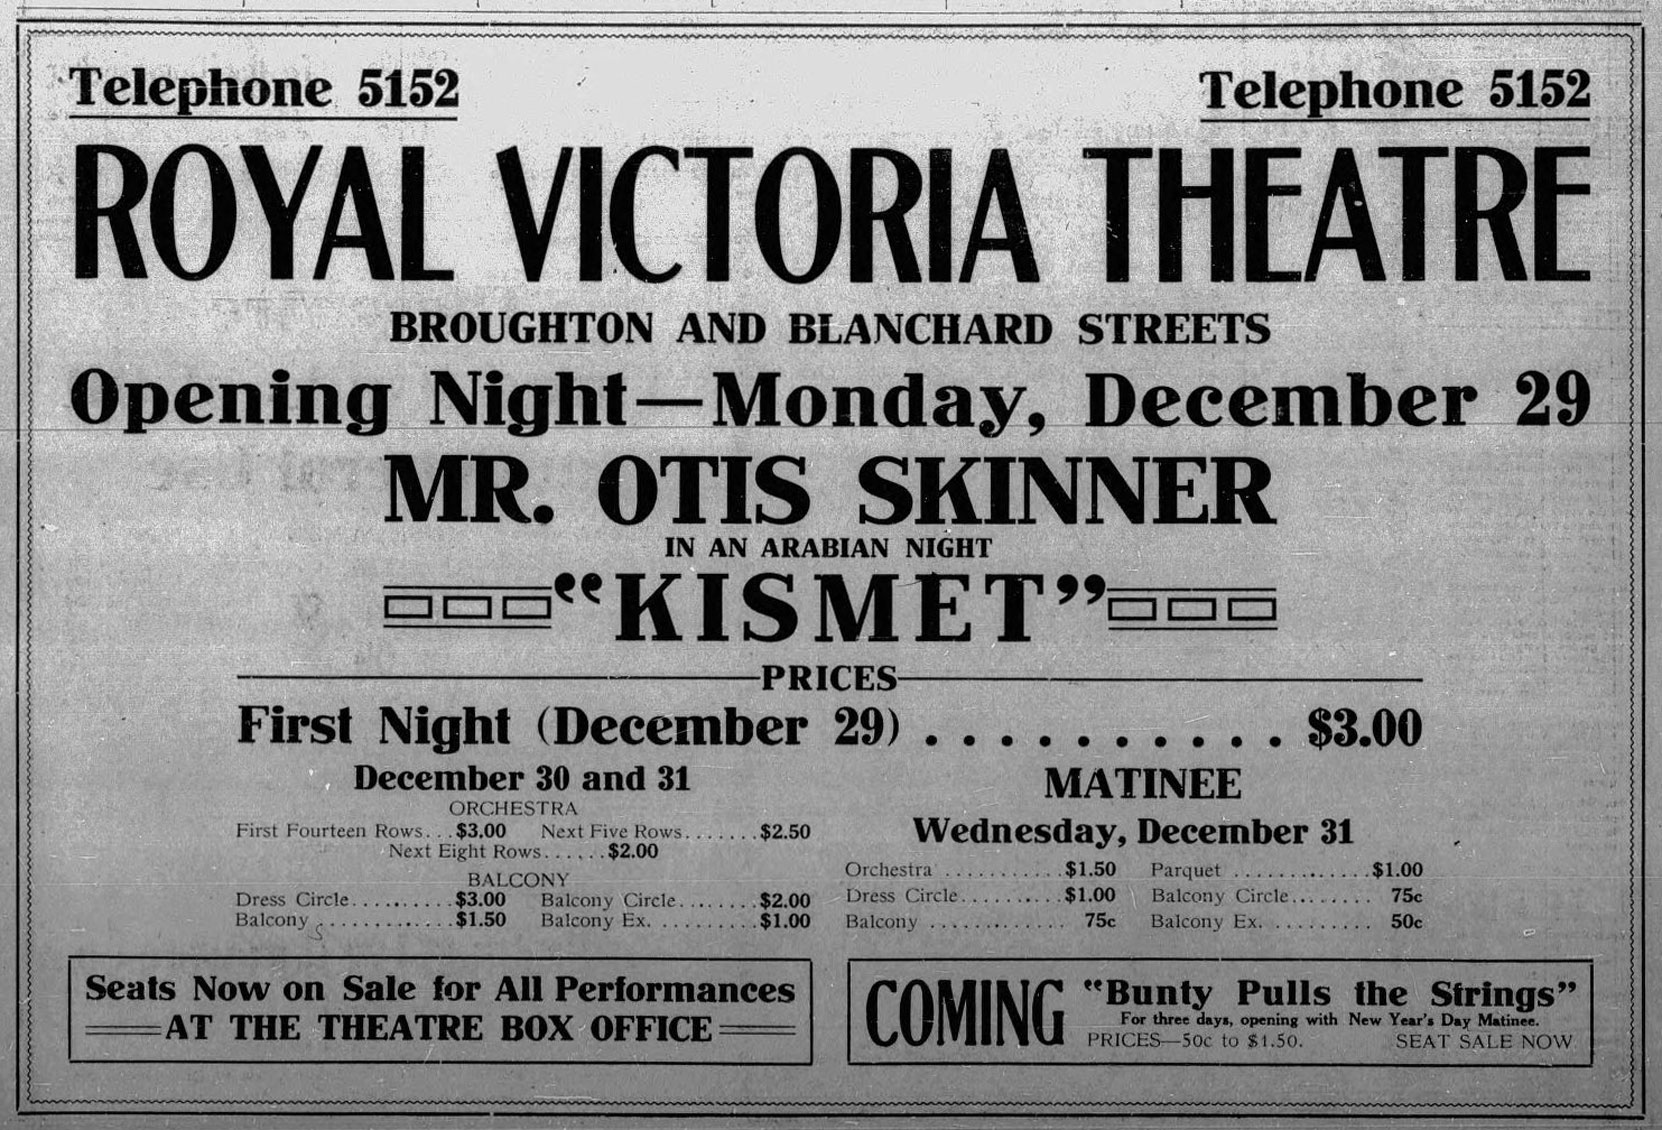 December 1913 advertisement for the opening night of the Royal Victoria Theatre (now the Royal Theatre), 29 December 1913 (Victoria Online Sightseeing Tours collection)